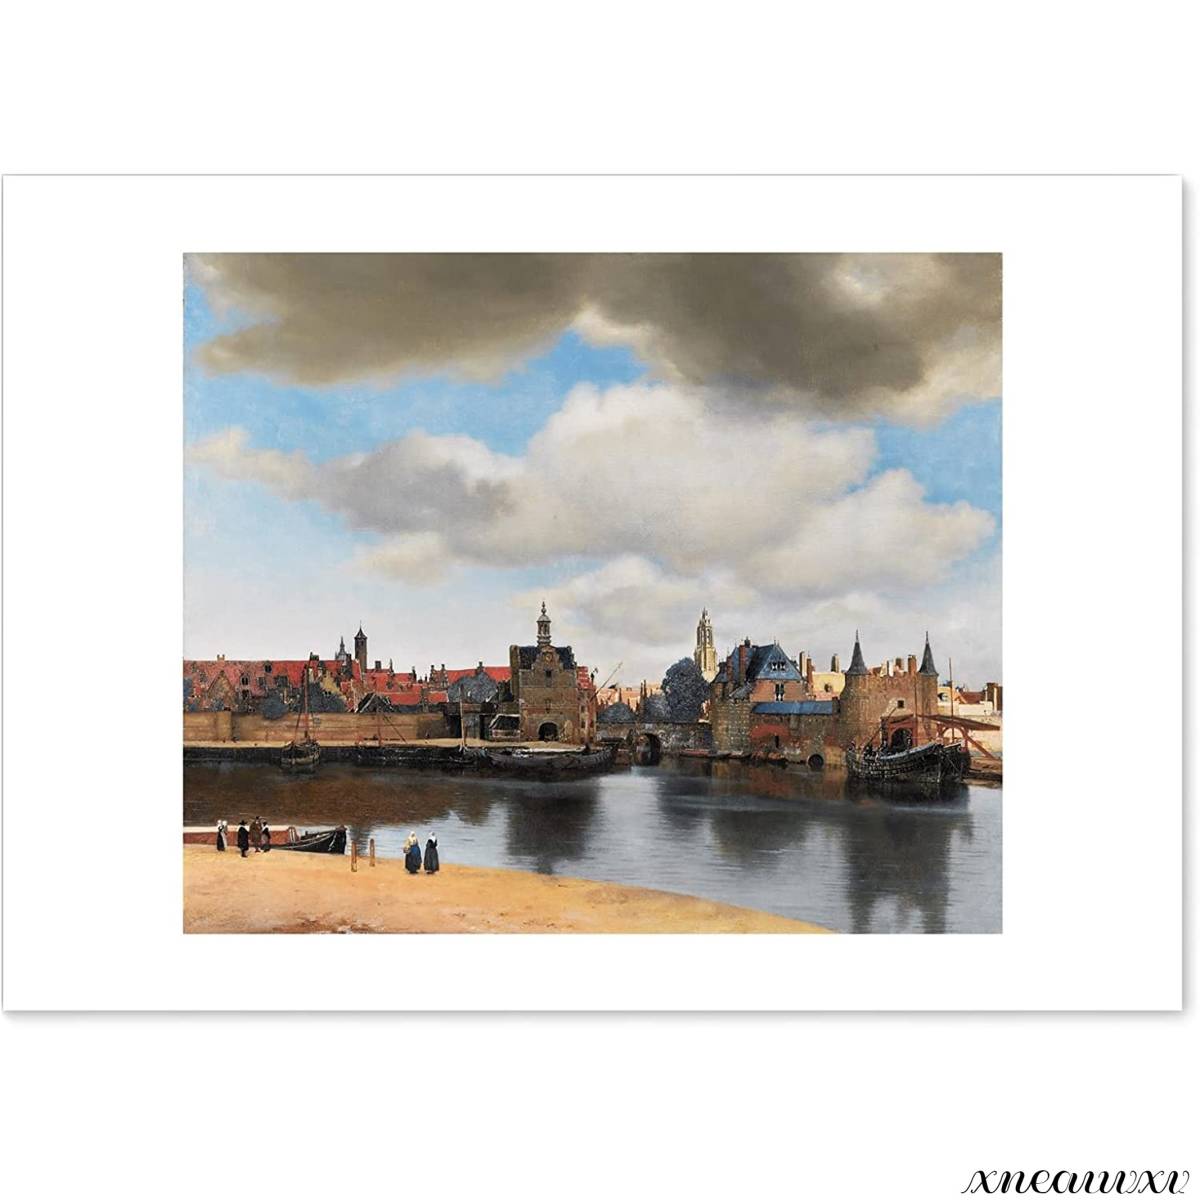 Johannes Vermeer, View of Delft, Painting, Made in Japan, A3 size, Reproduction, Landscape painting, Interior, Wall hanging, Room decoration, Decorative painting, Art, Poster, Art, Artwork, Painting, Pastel drawing, Crayon drawing